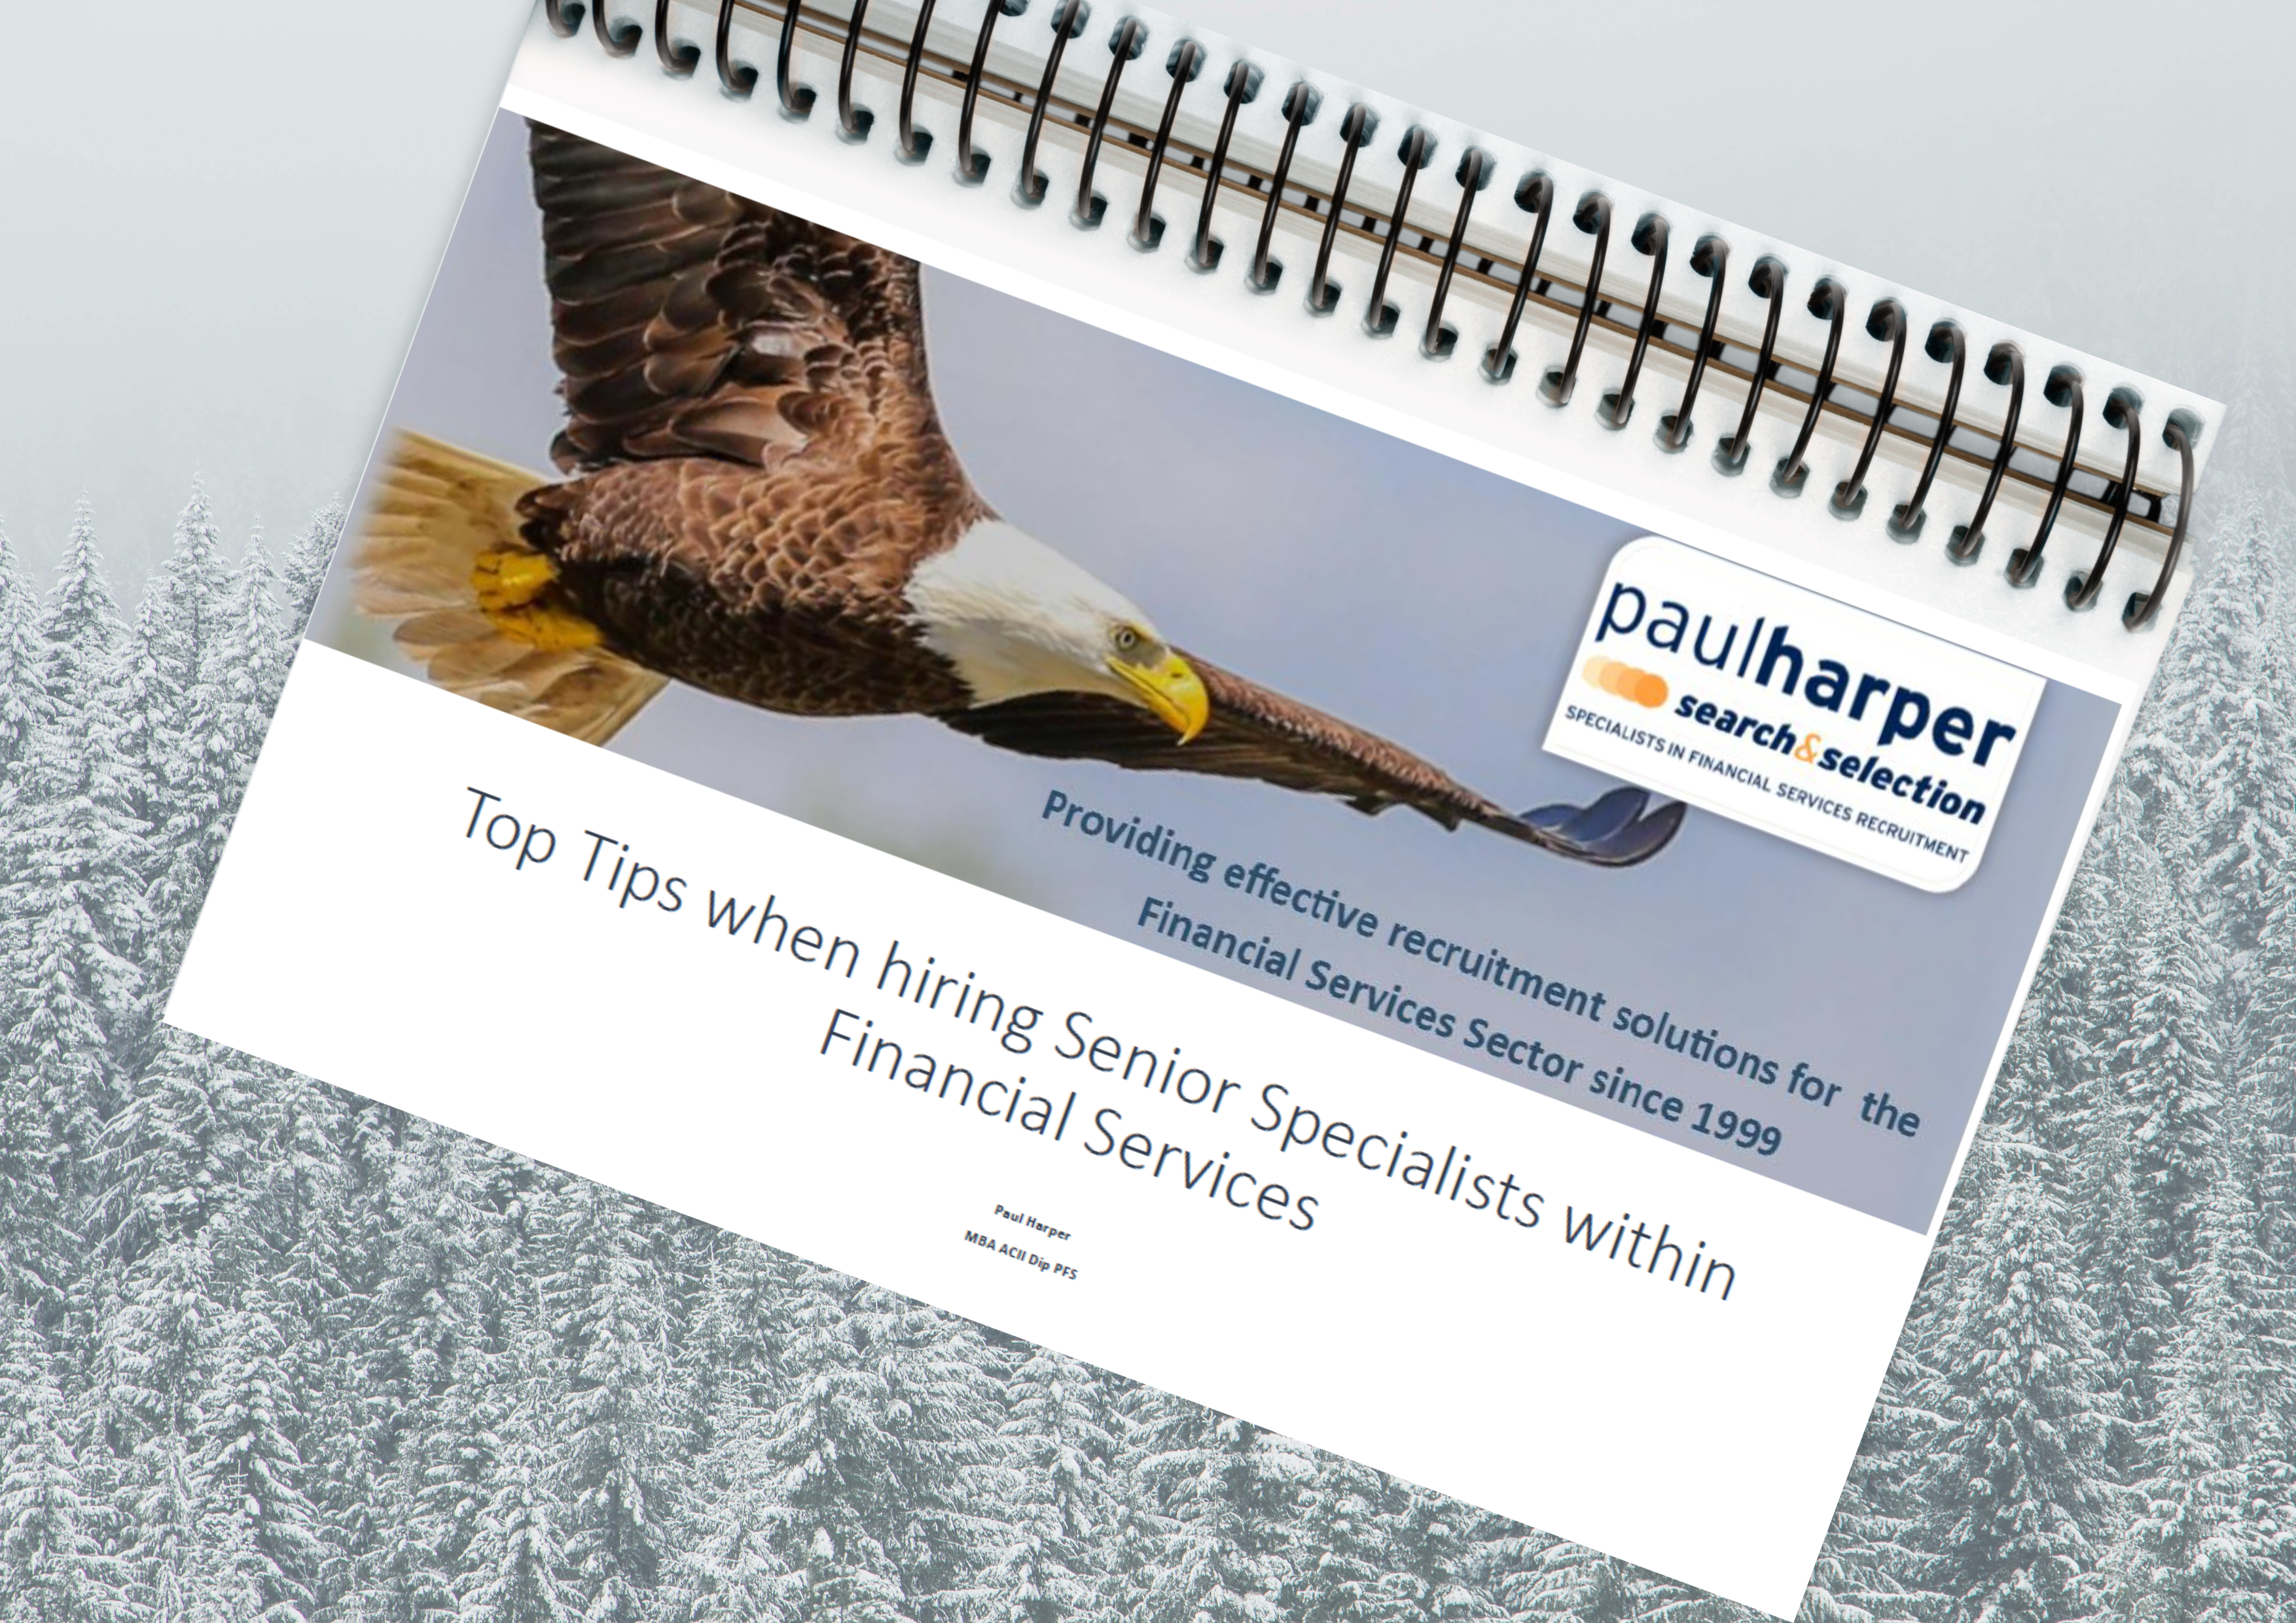 Top Tips when hiring Senior Specialists